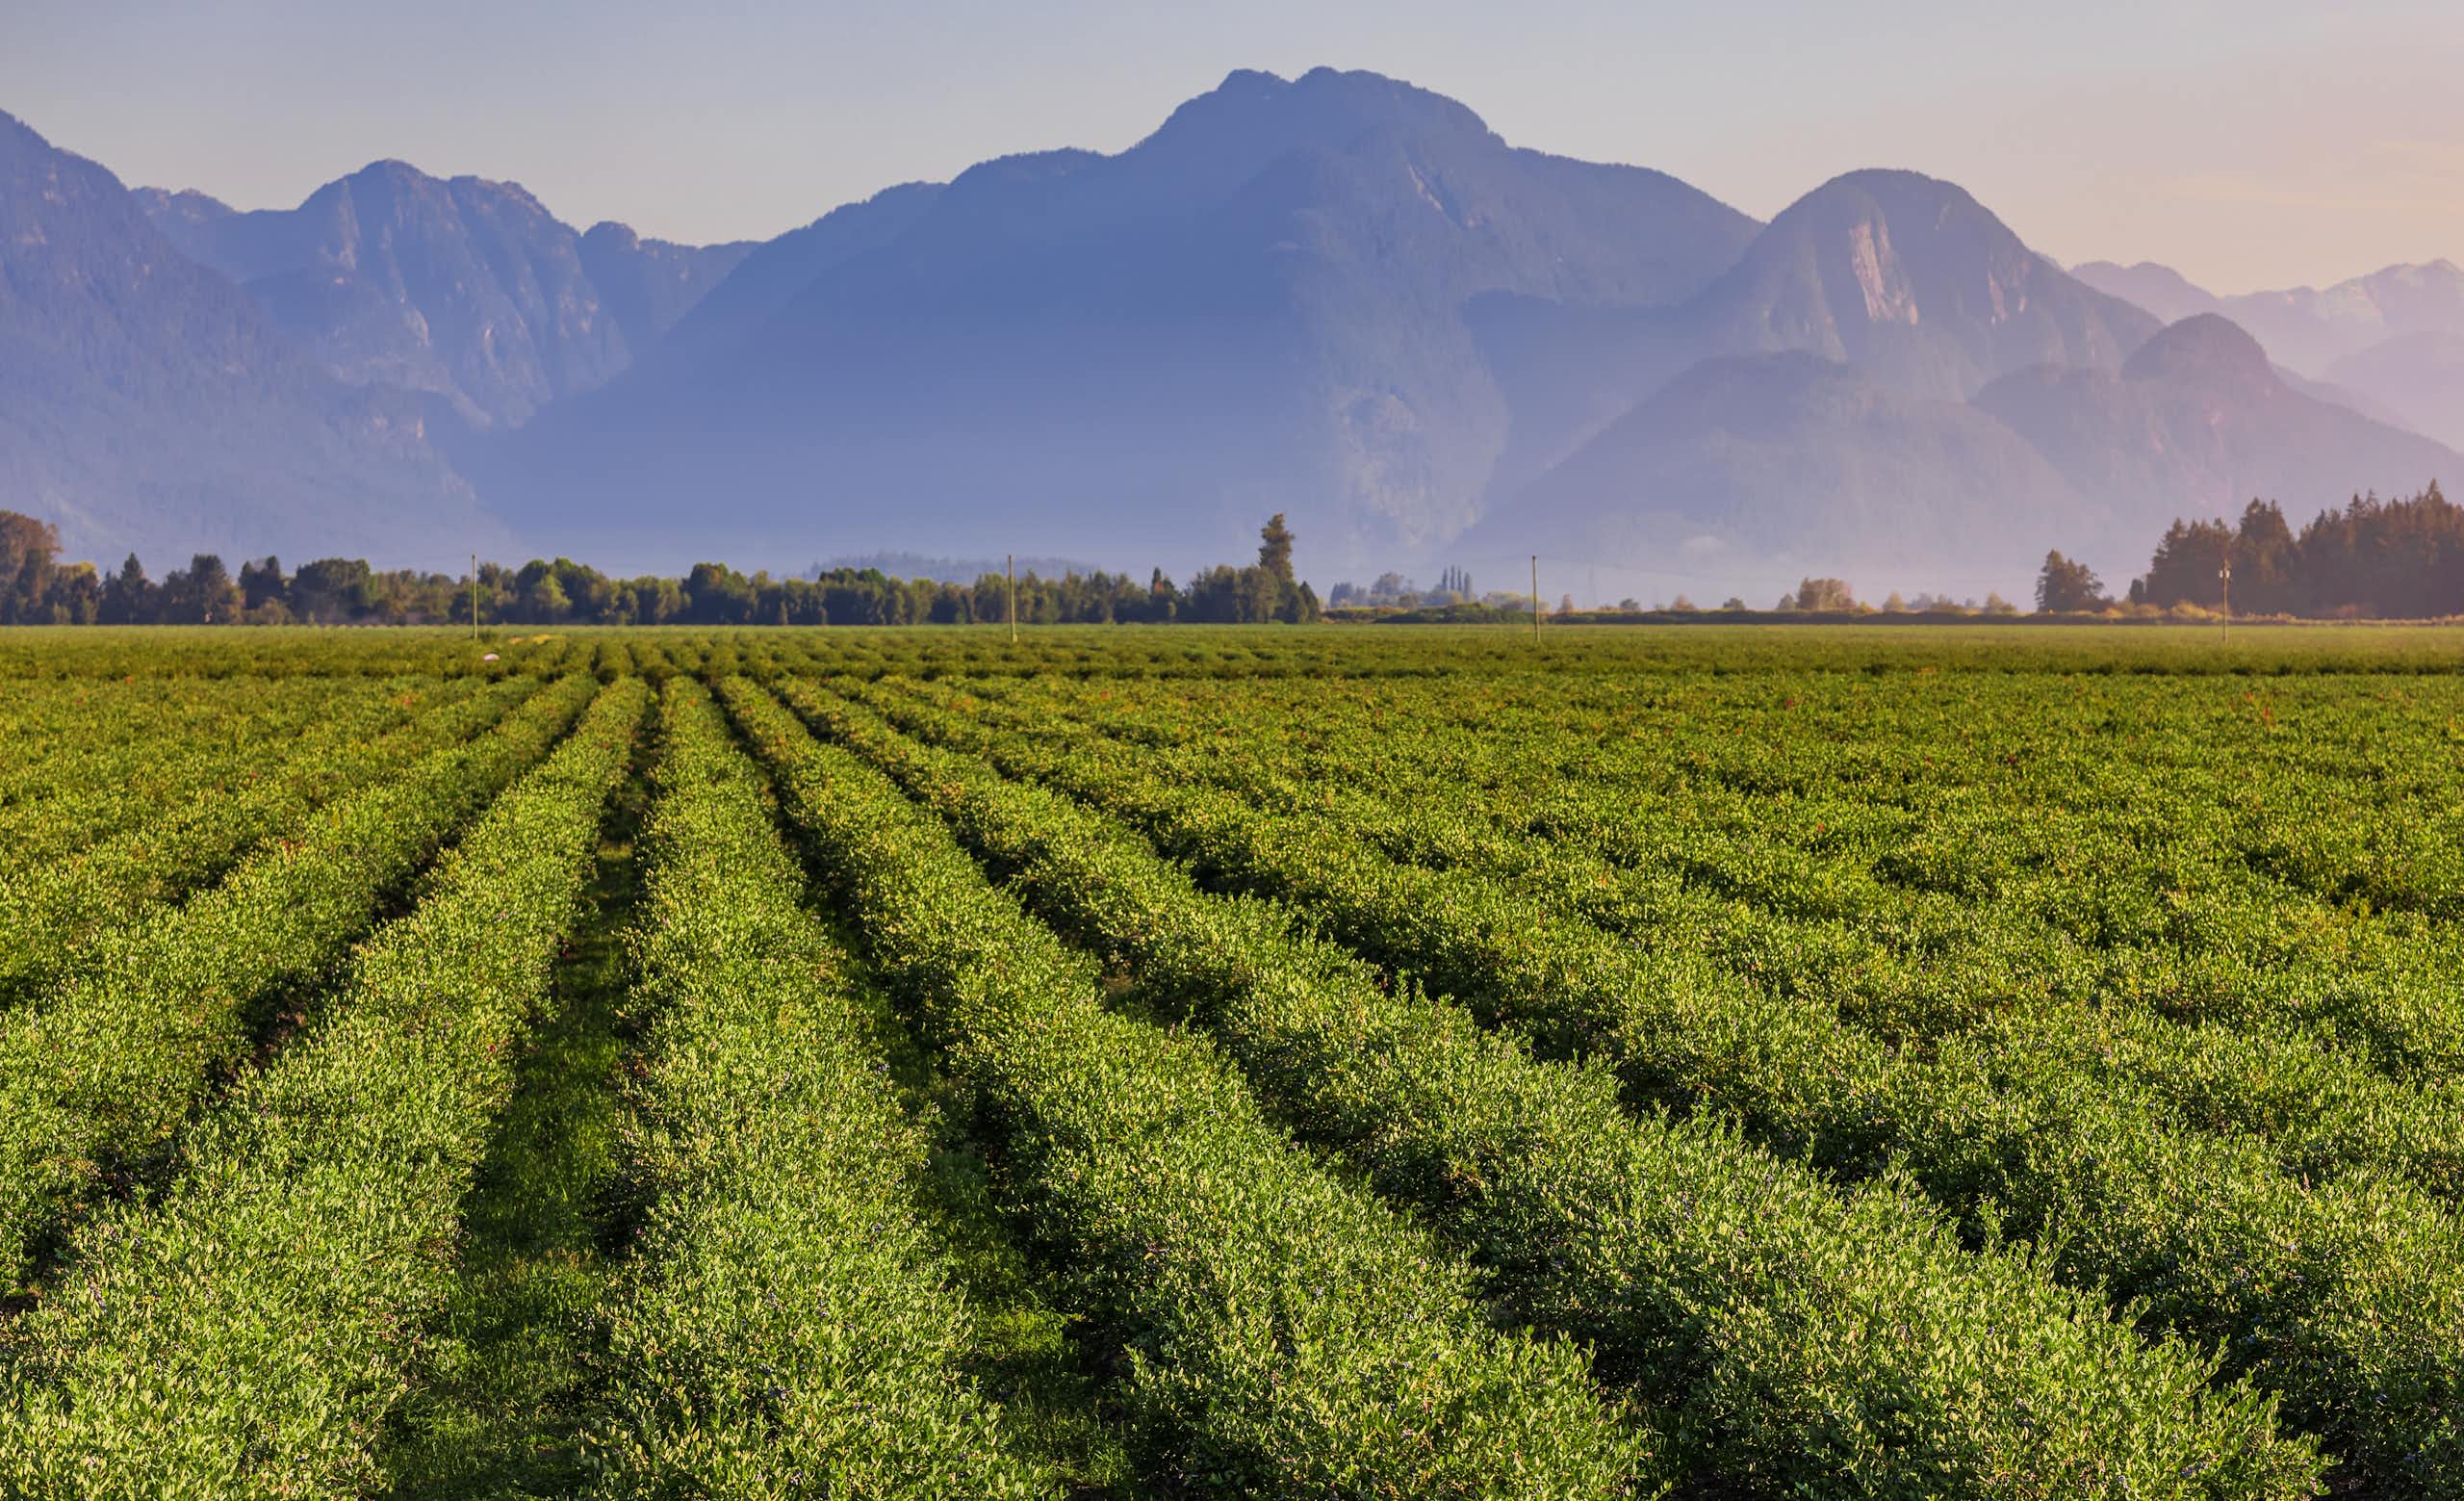 A landscape photo of a field of blueberries with mountains in the distance